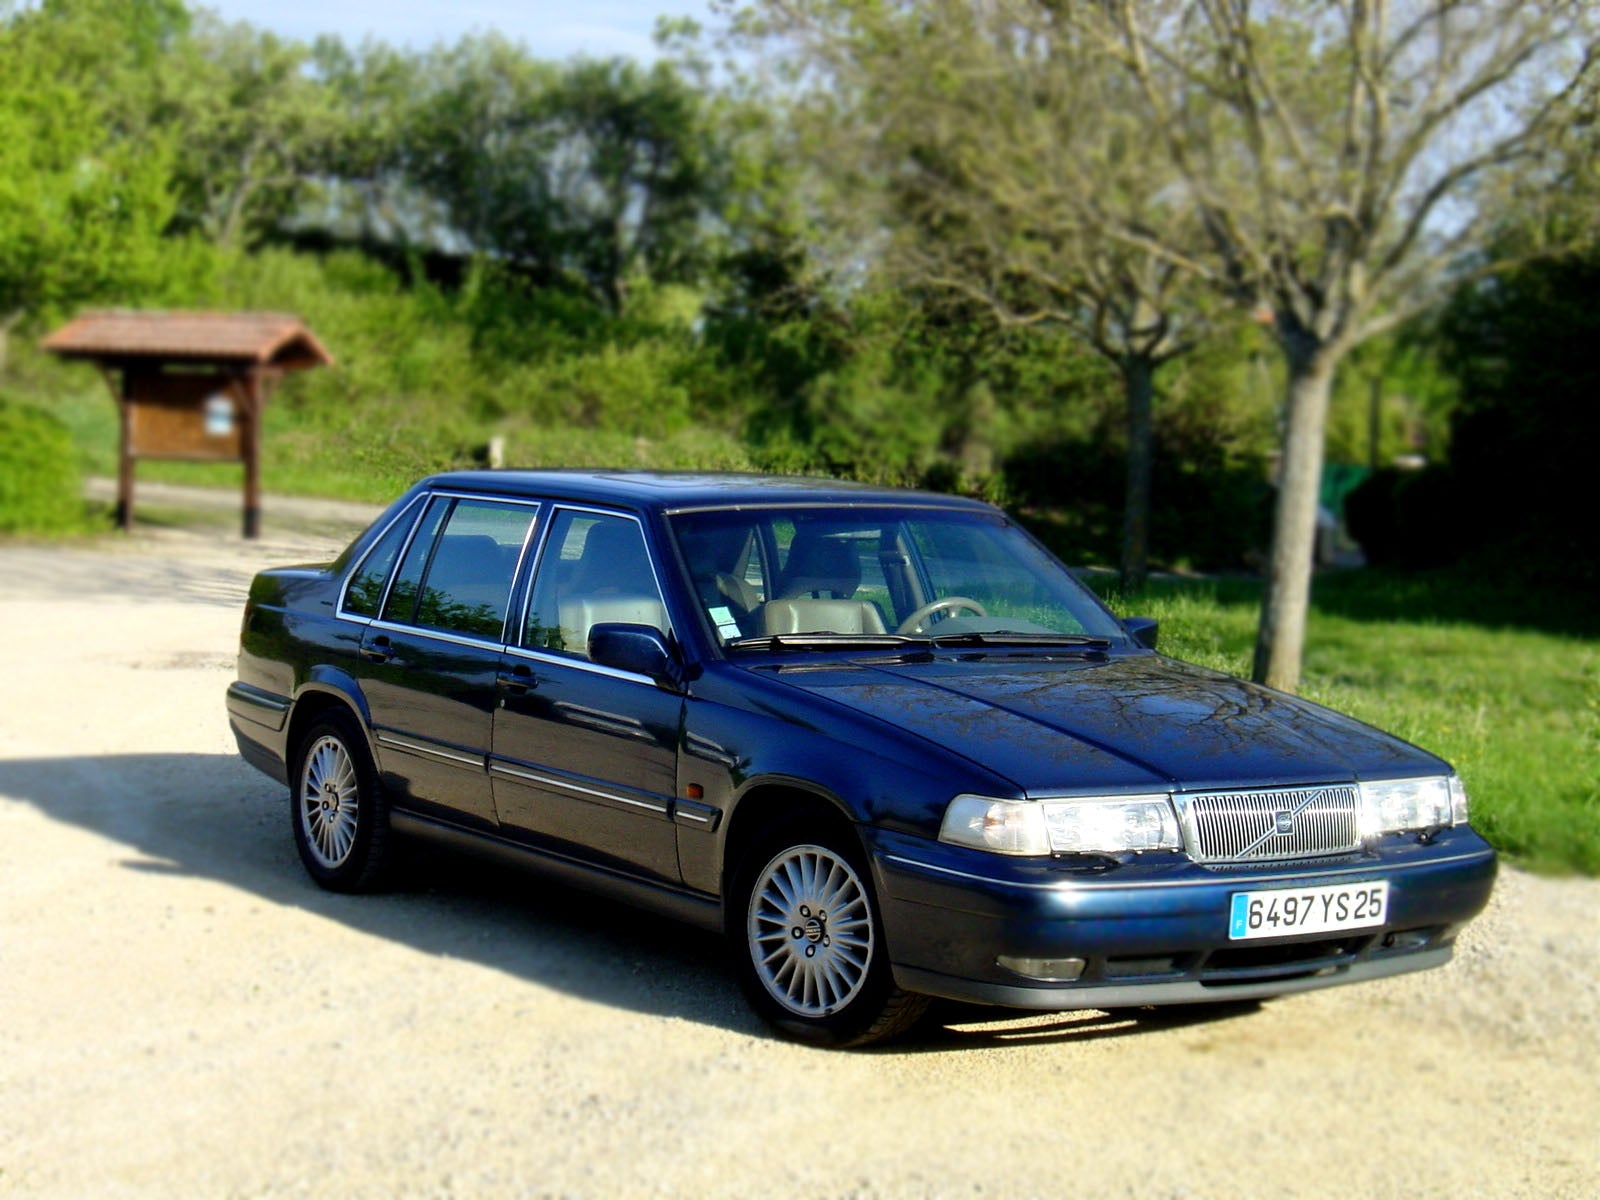  Volvo Xc90 on Volvo 960 Picture View Garage Vincent Used To Own This Volvo 960 Check